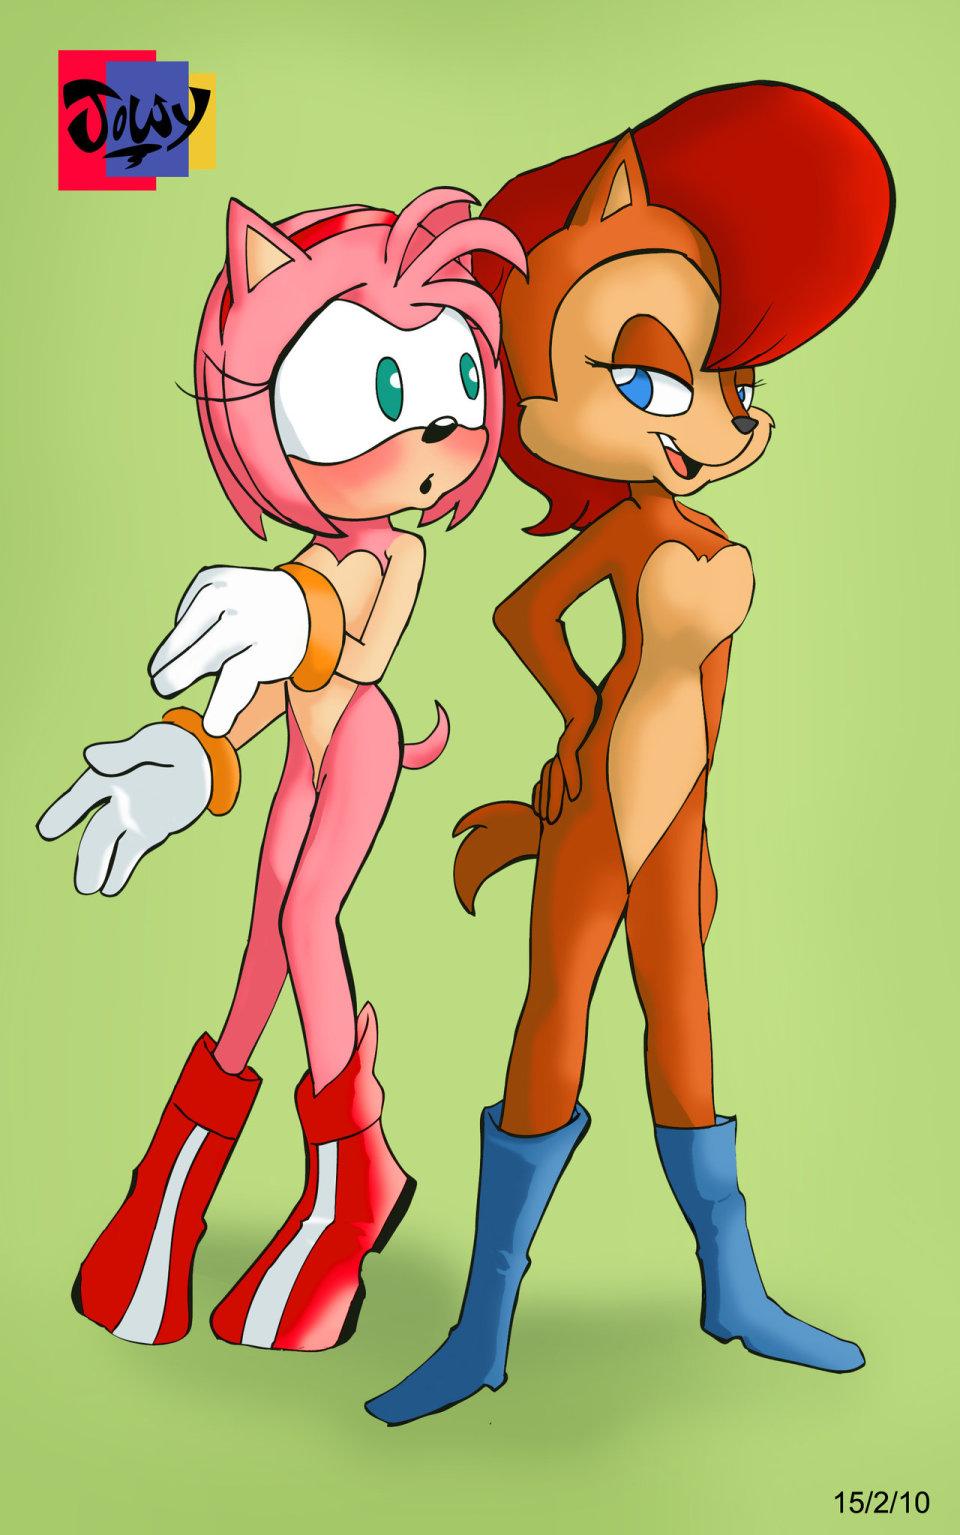 Sonic and amy having sex